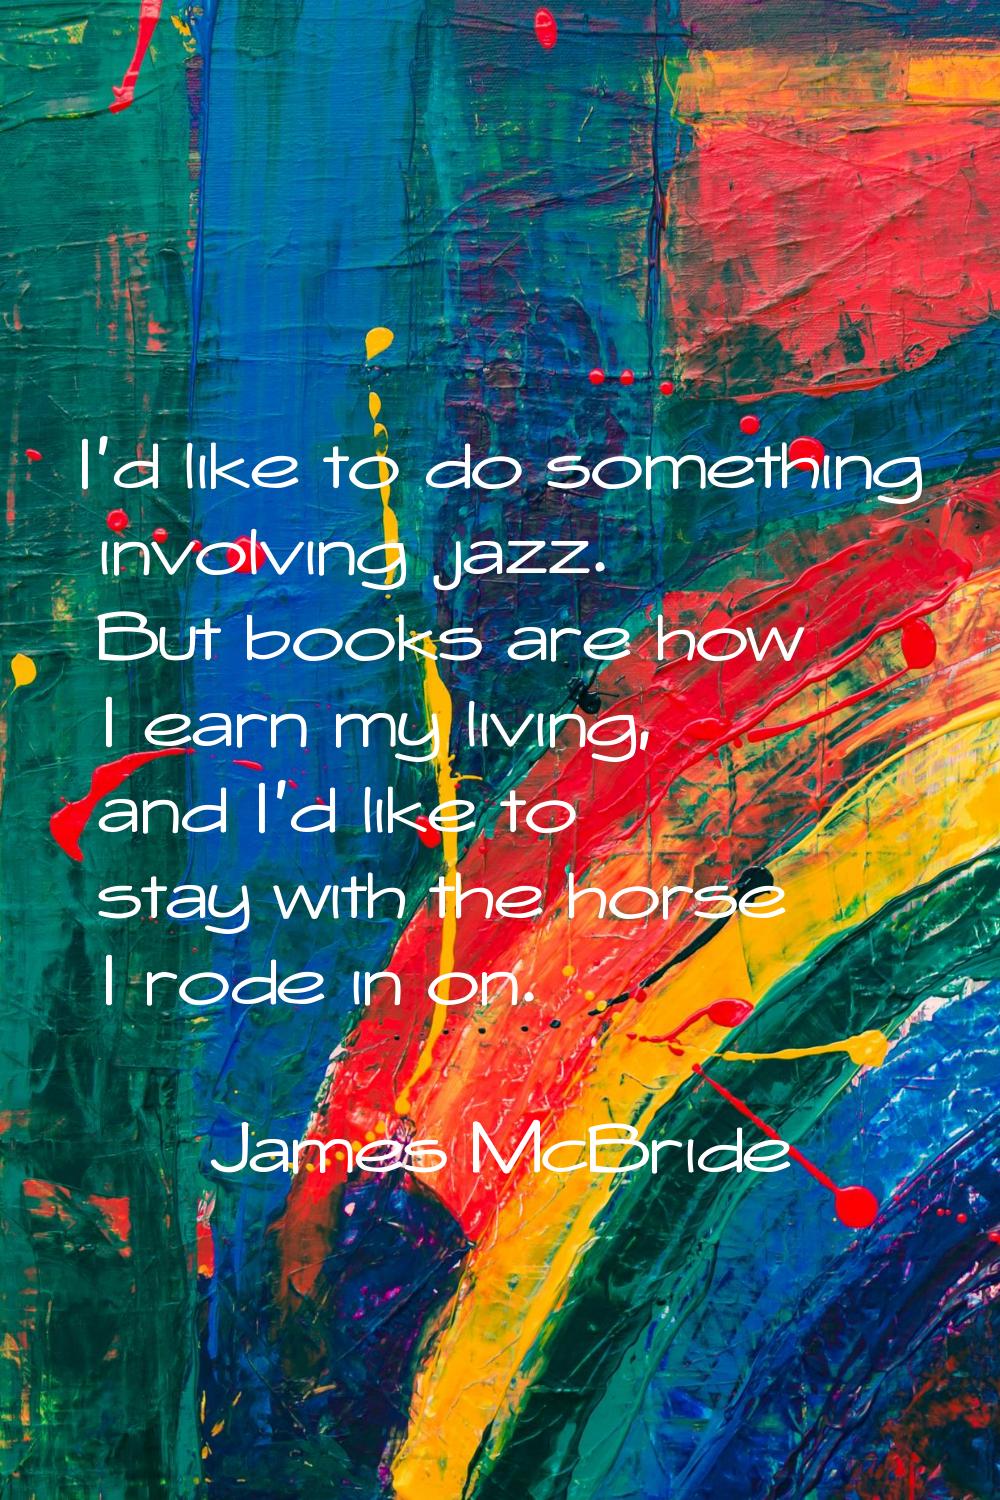 I'd like to do something involving jazz. But books are how I earn my living, and I'd like to stay w